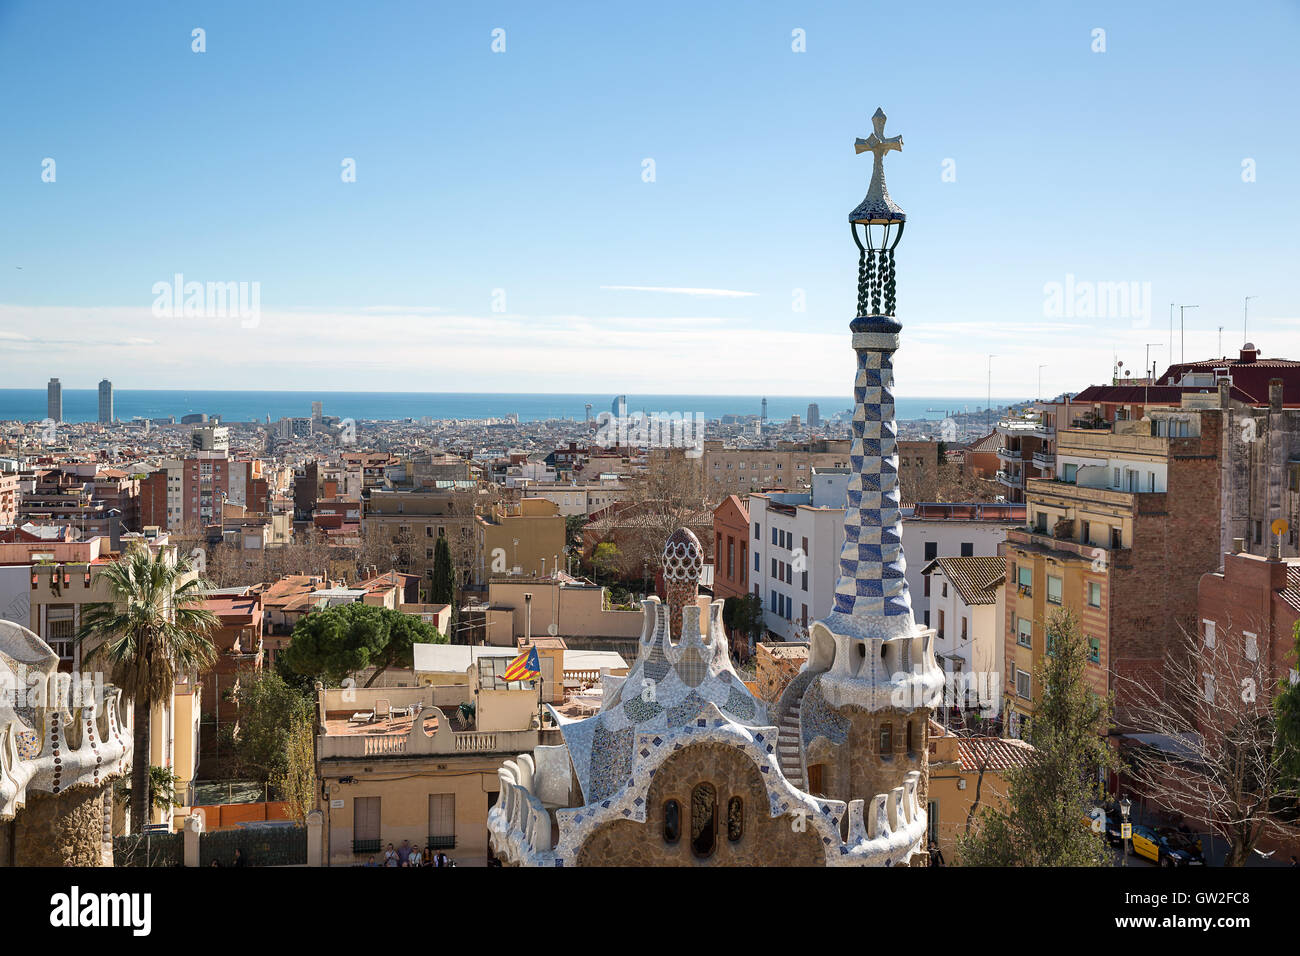 The Gaudi Park (Parc Guell) in Barcelona, Spain Stock Photo